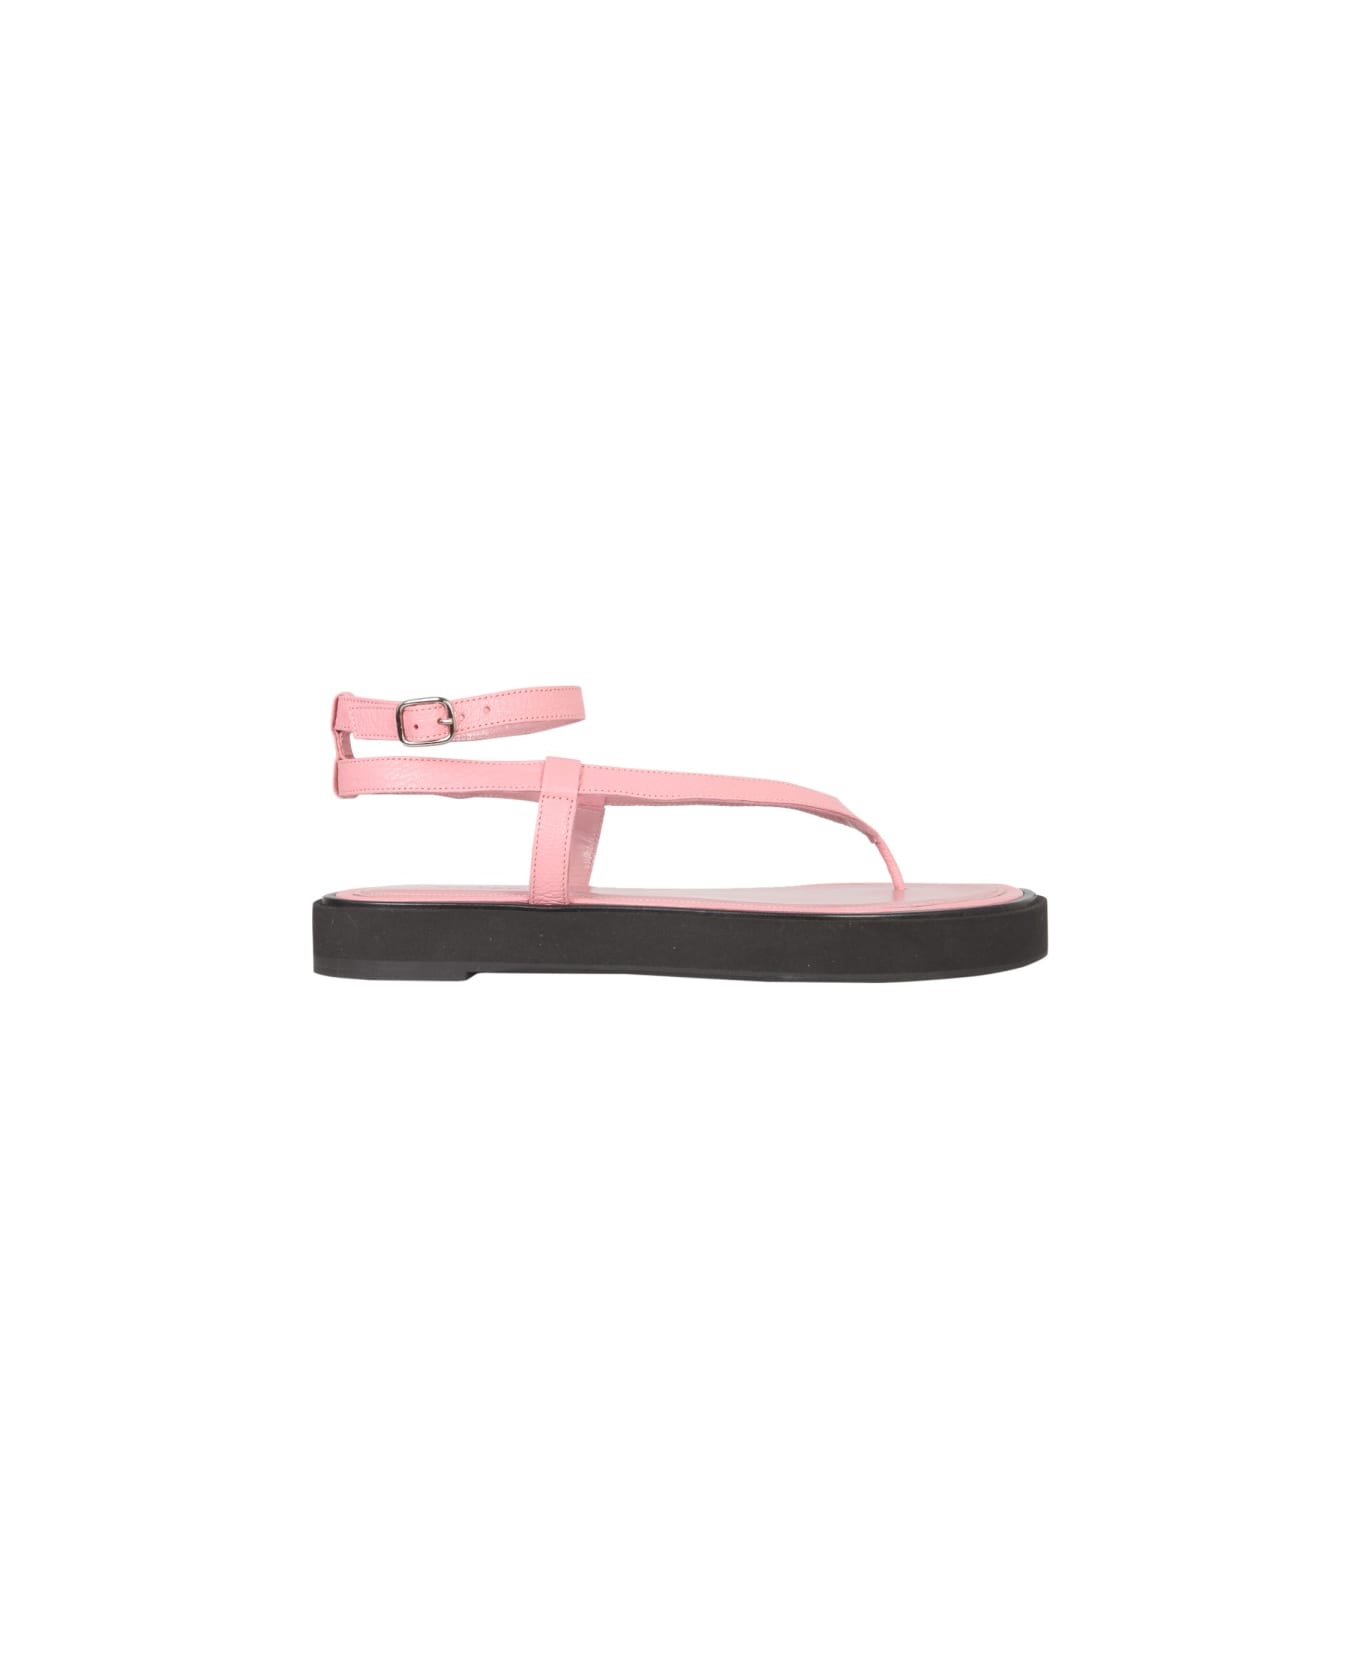 BY FAR Cece Thong Sandals - PINK サンダル